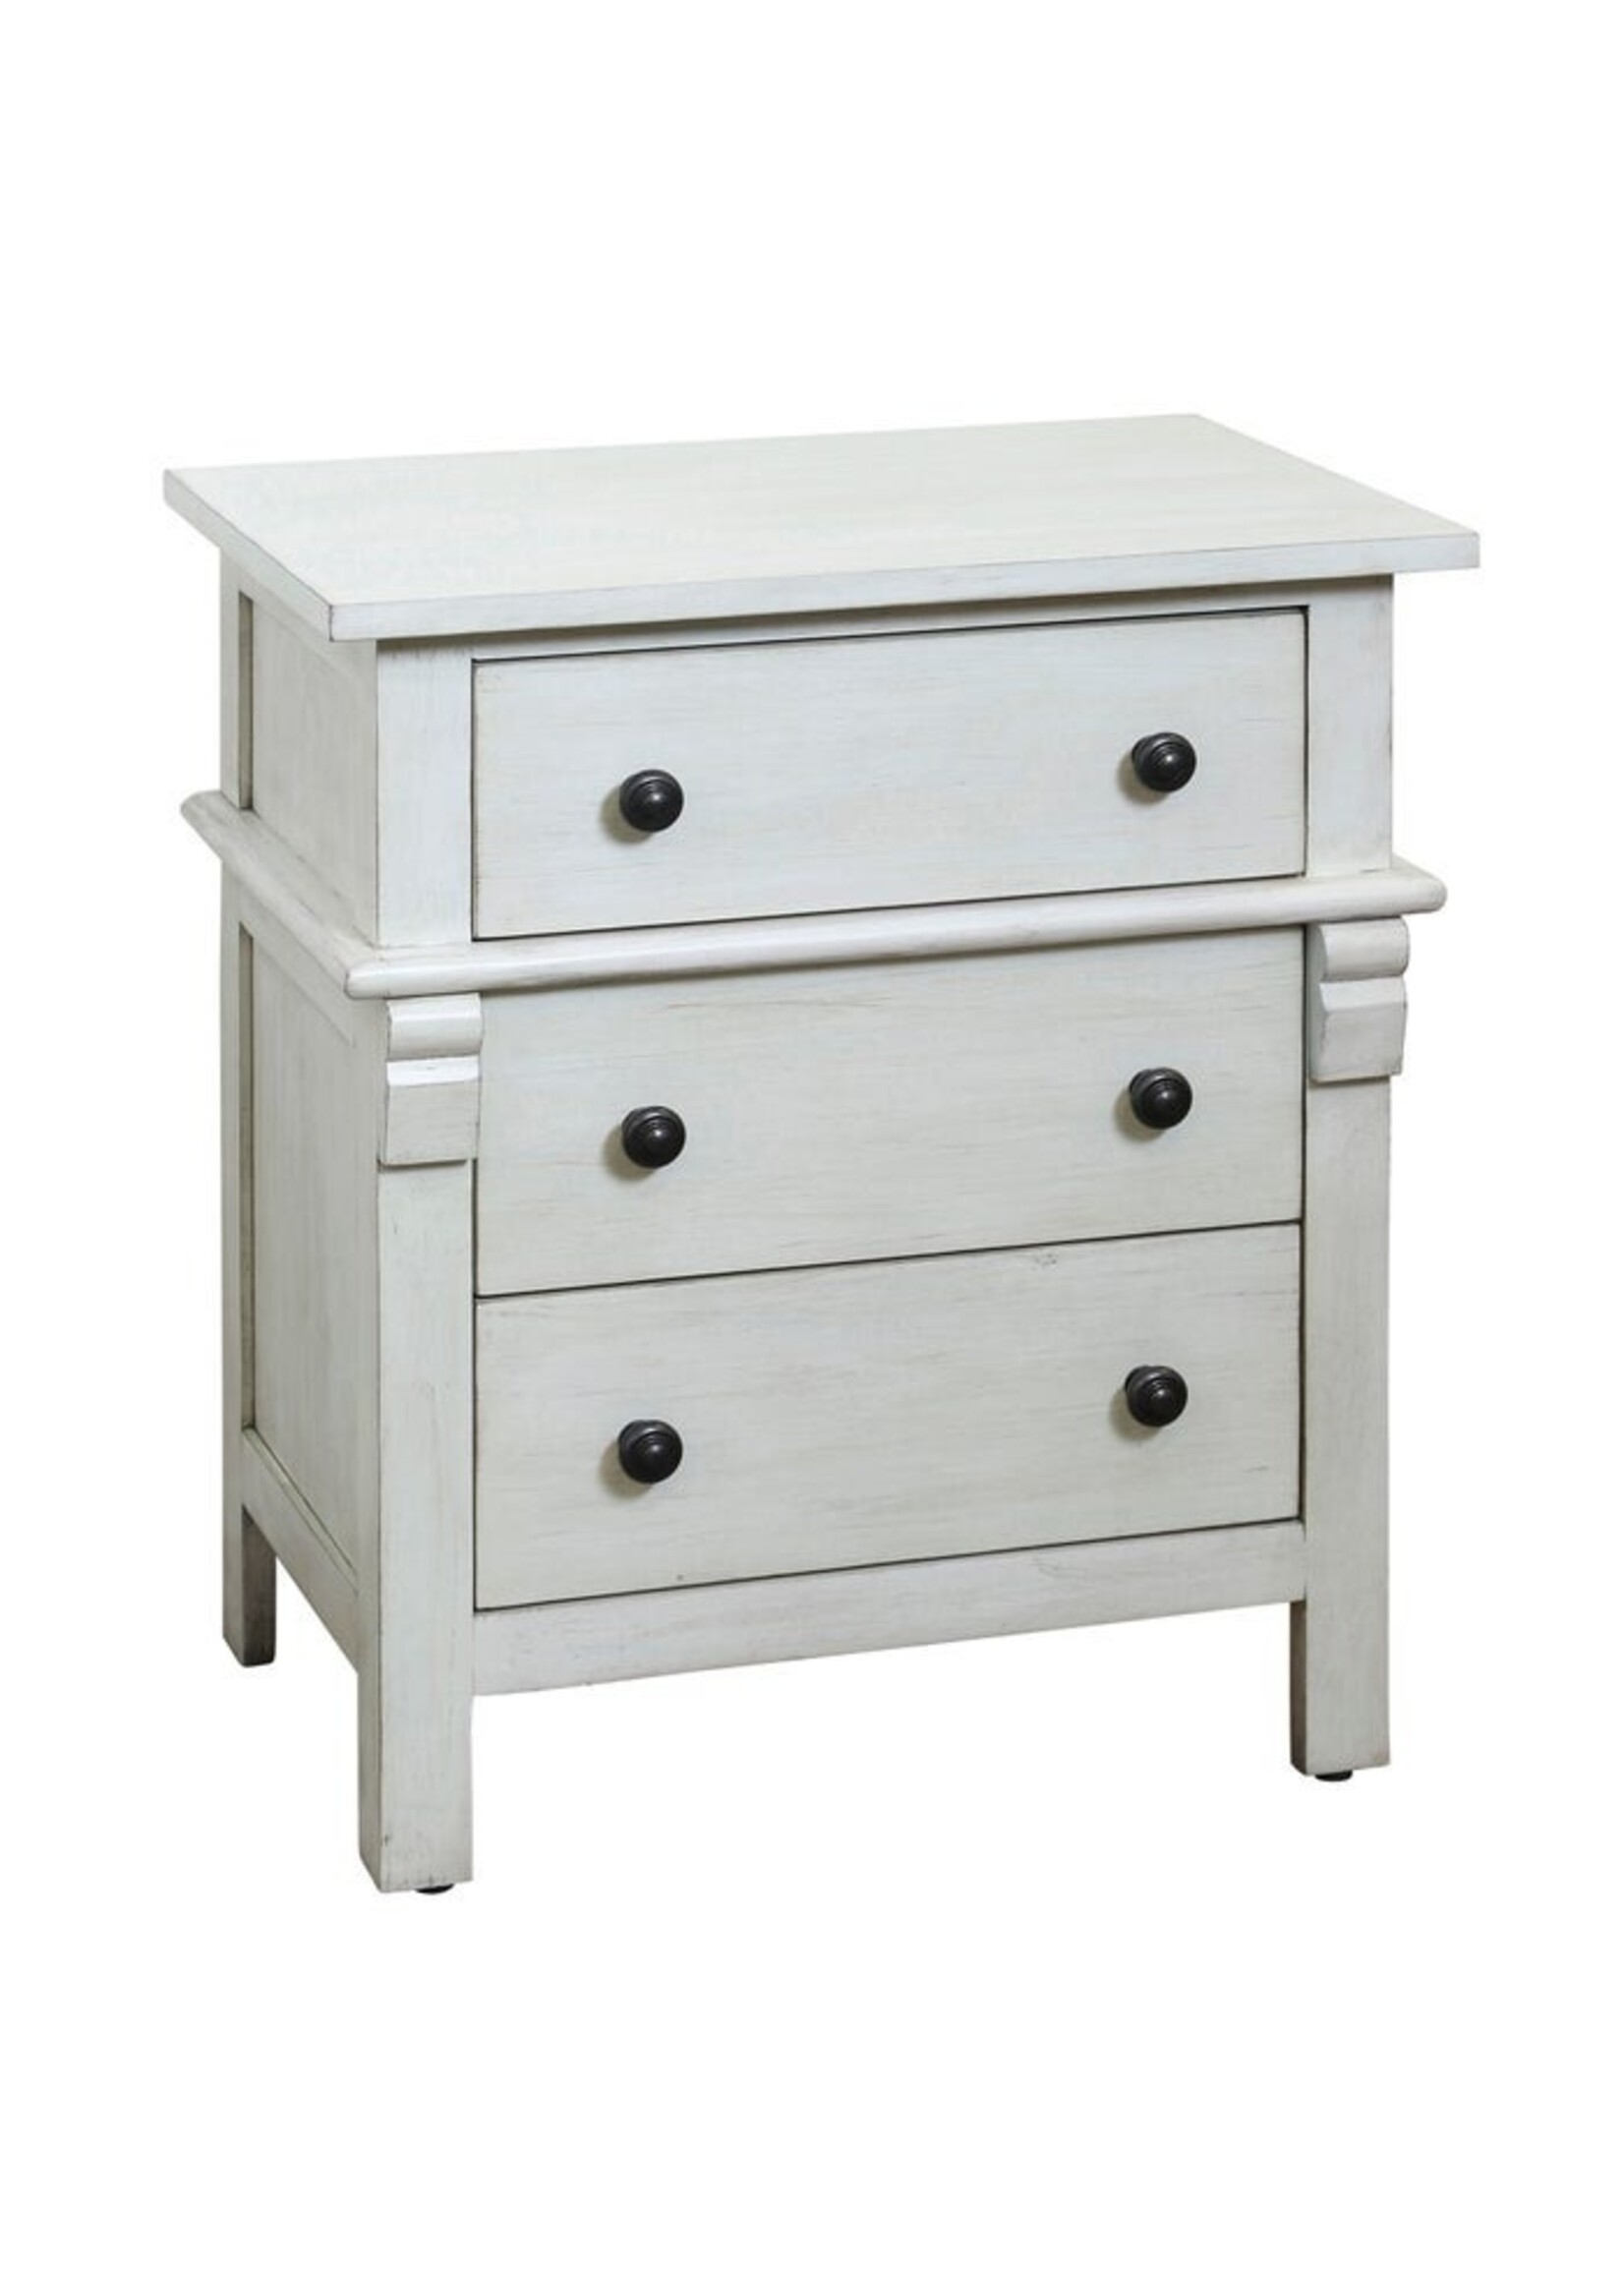 Style Craft Brushed White Finish on Pine Veneer | Three Drawers | 22in X 14in X 25in